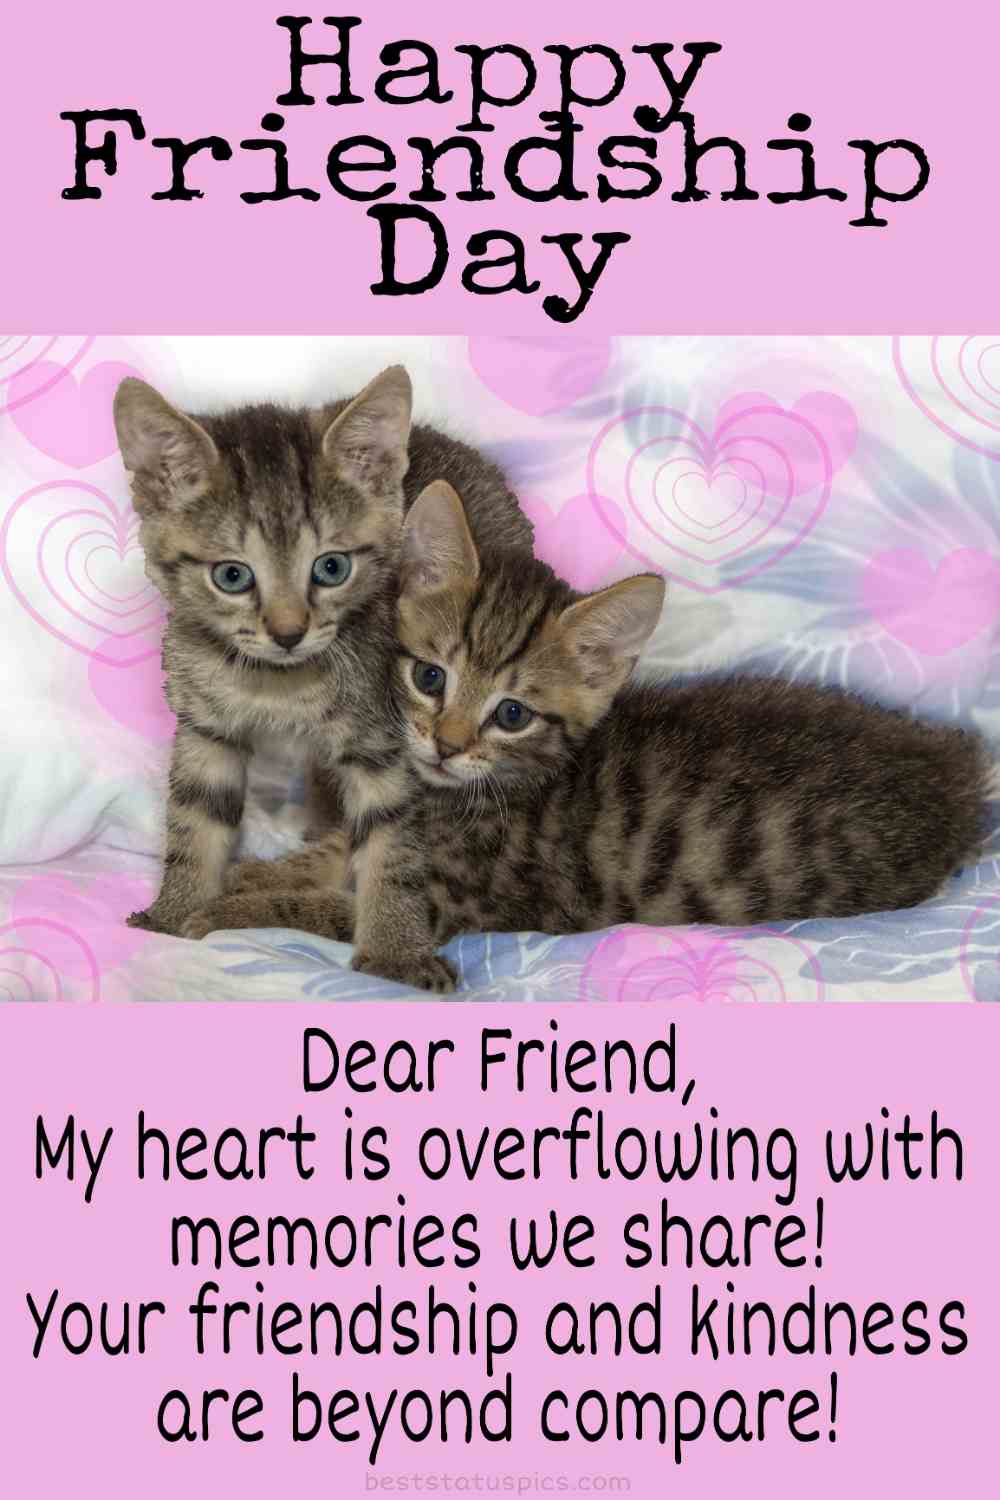 Happy Friendship Day 2022 greeting cards and quotes with cats image